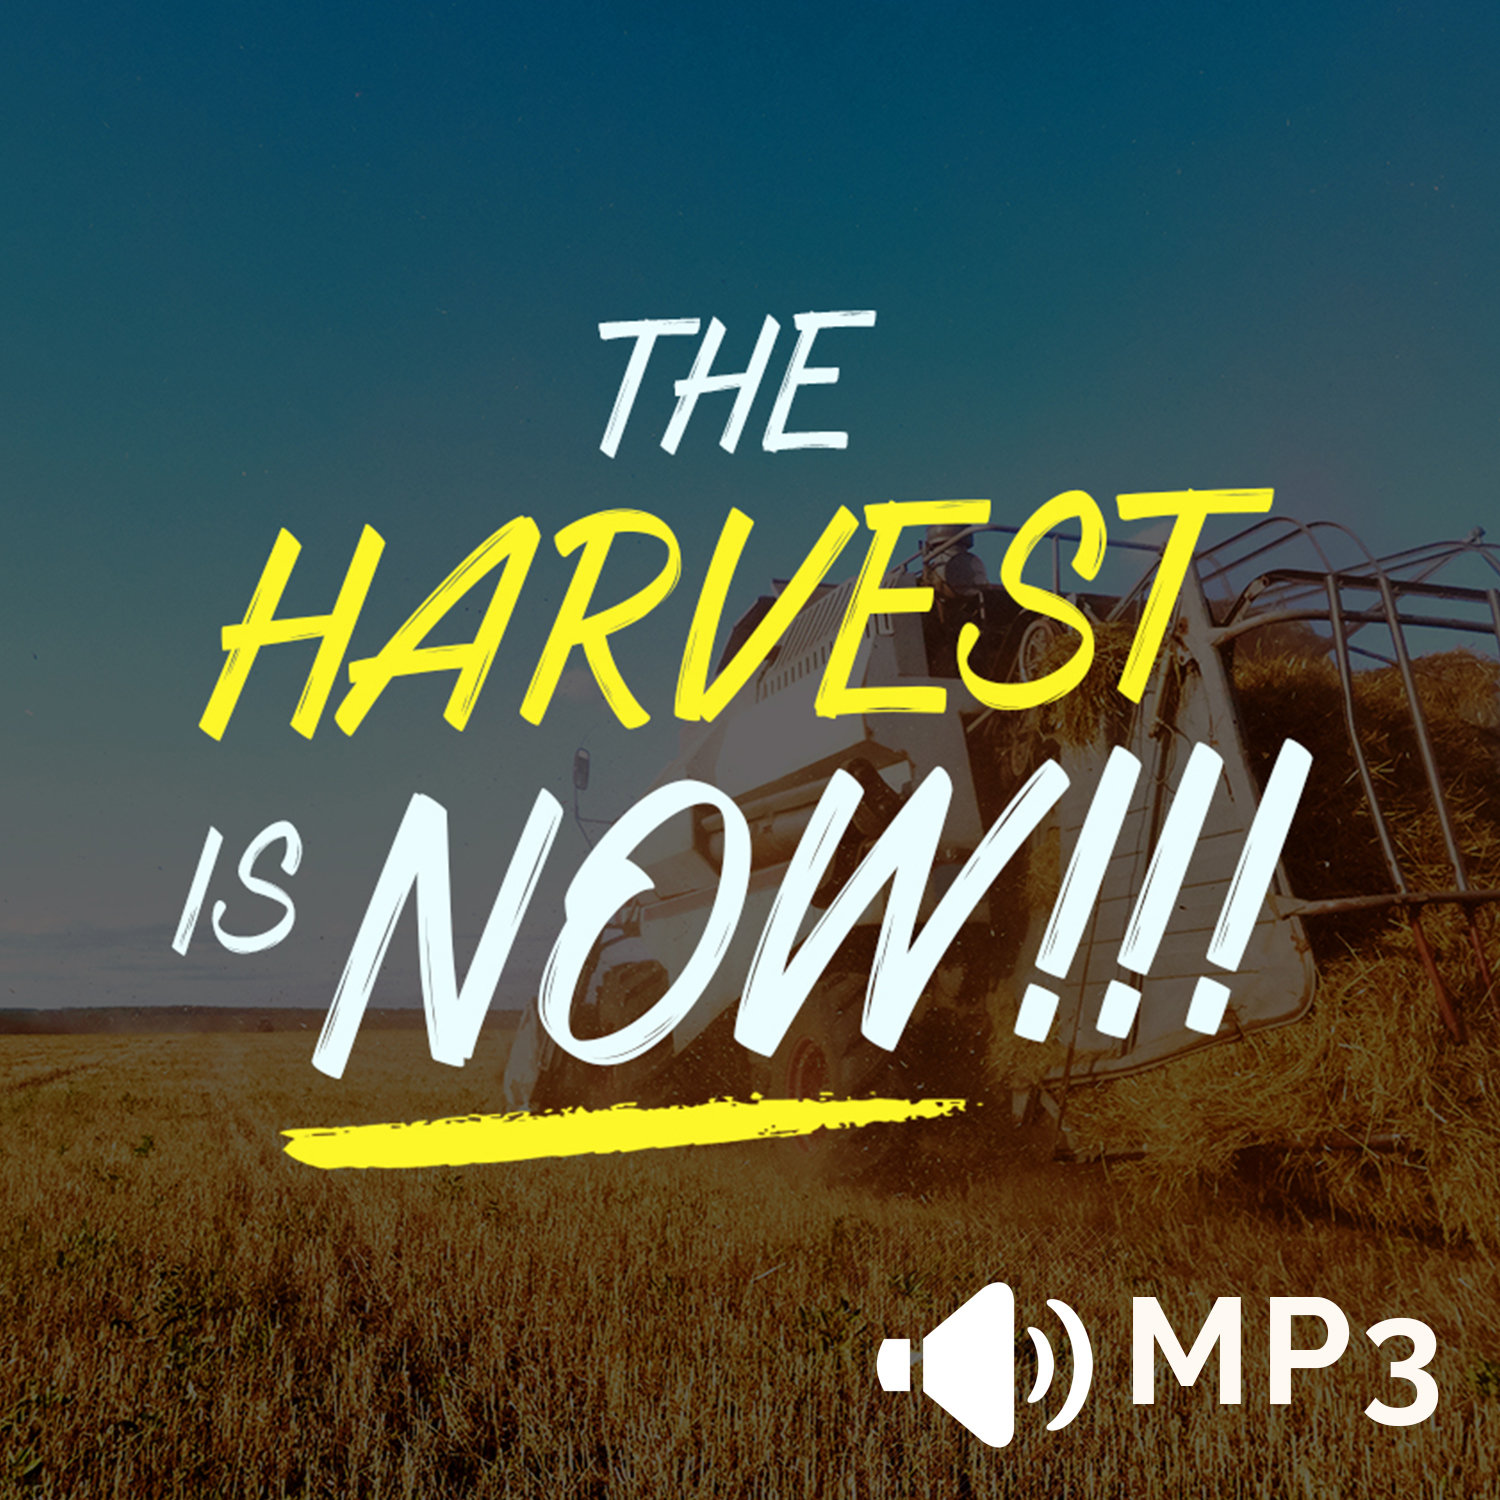 The Harvest is NOW!!!